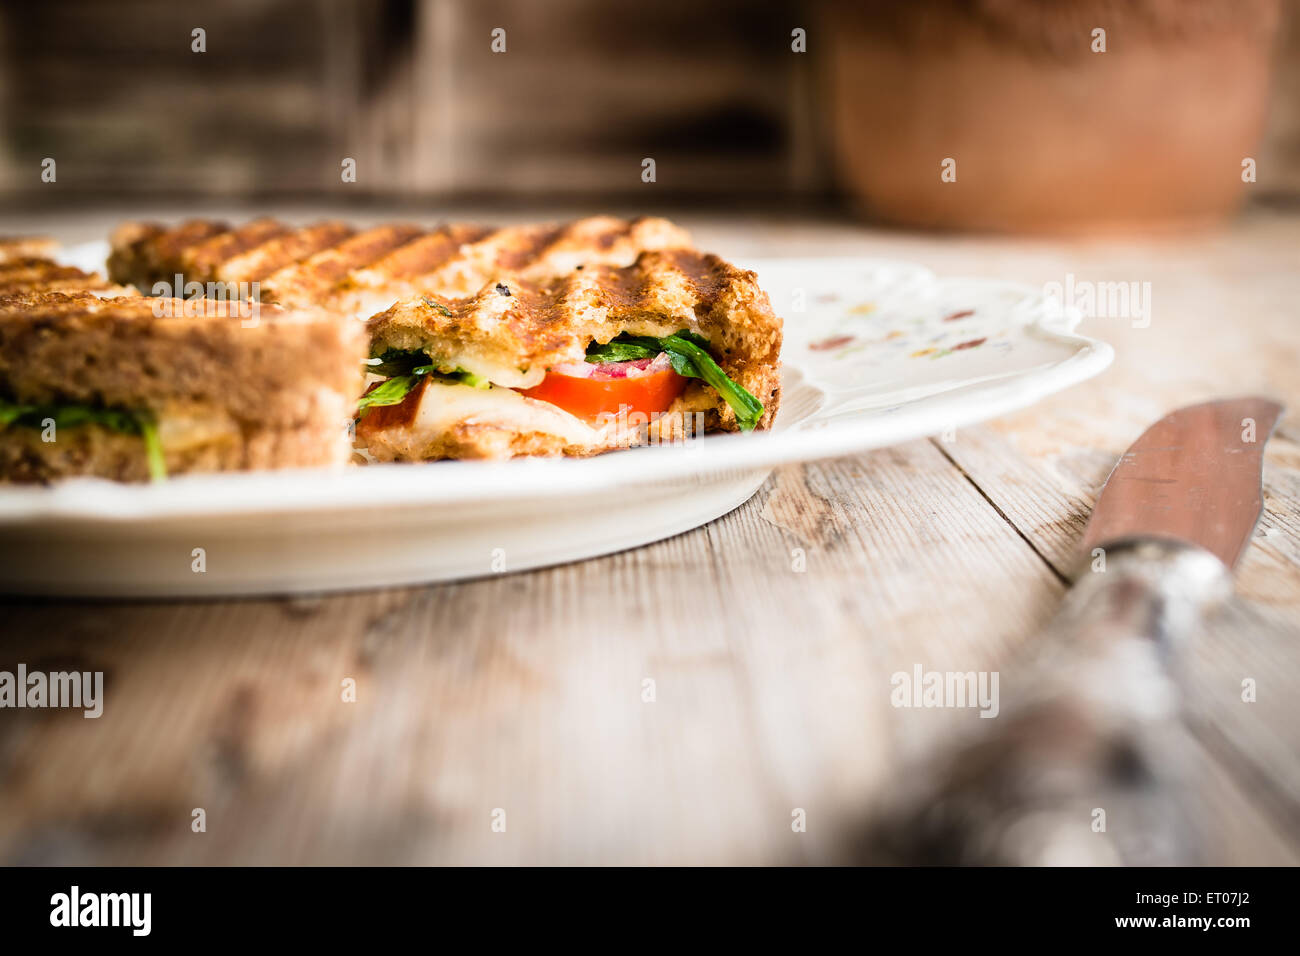 Vegetarian panini with tomatoes and mozzarella on rustic wooden table. Selective focus. Stock Photo